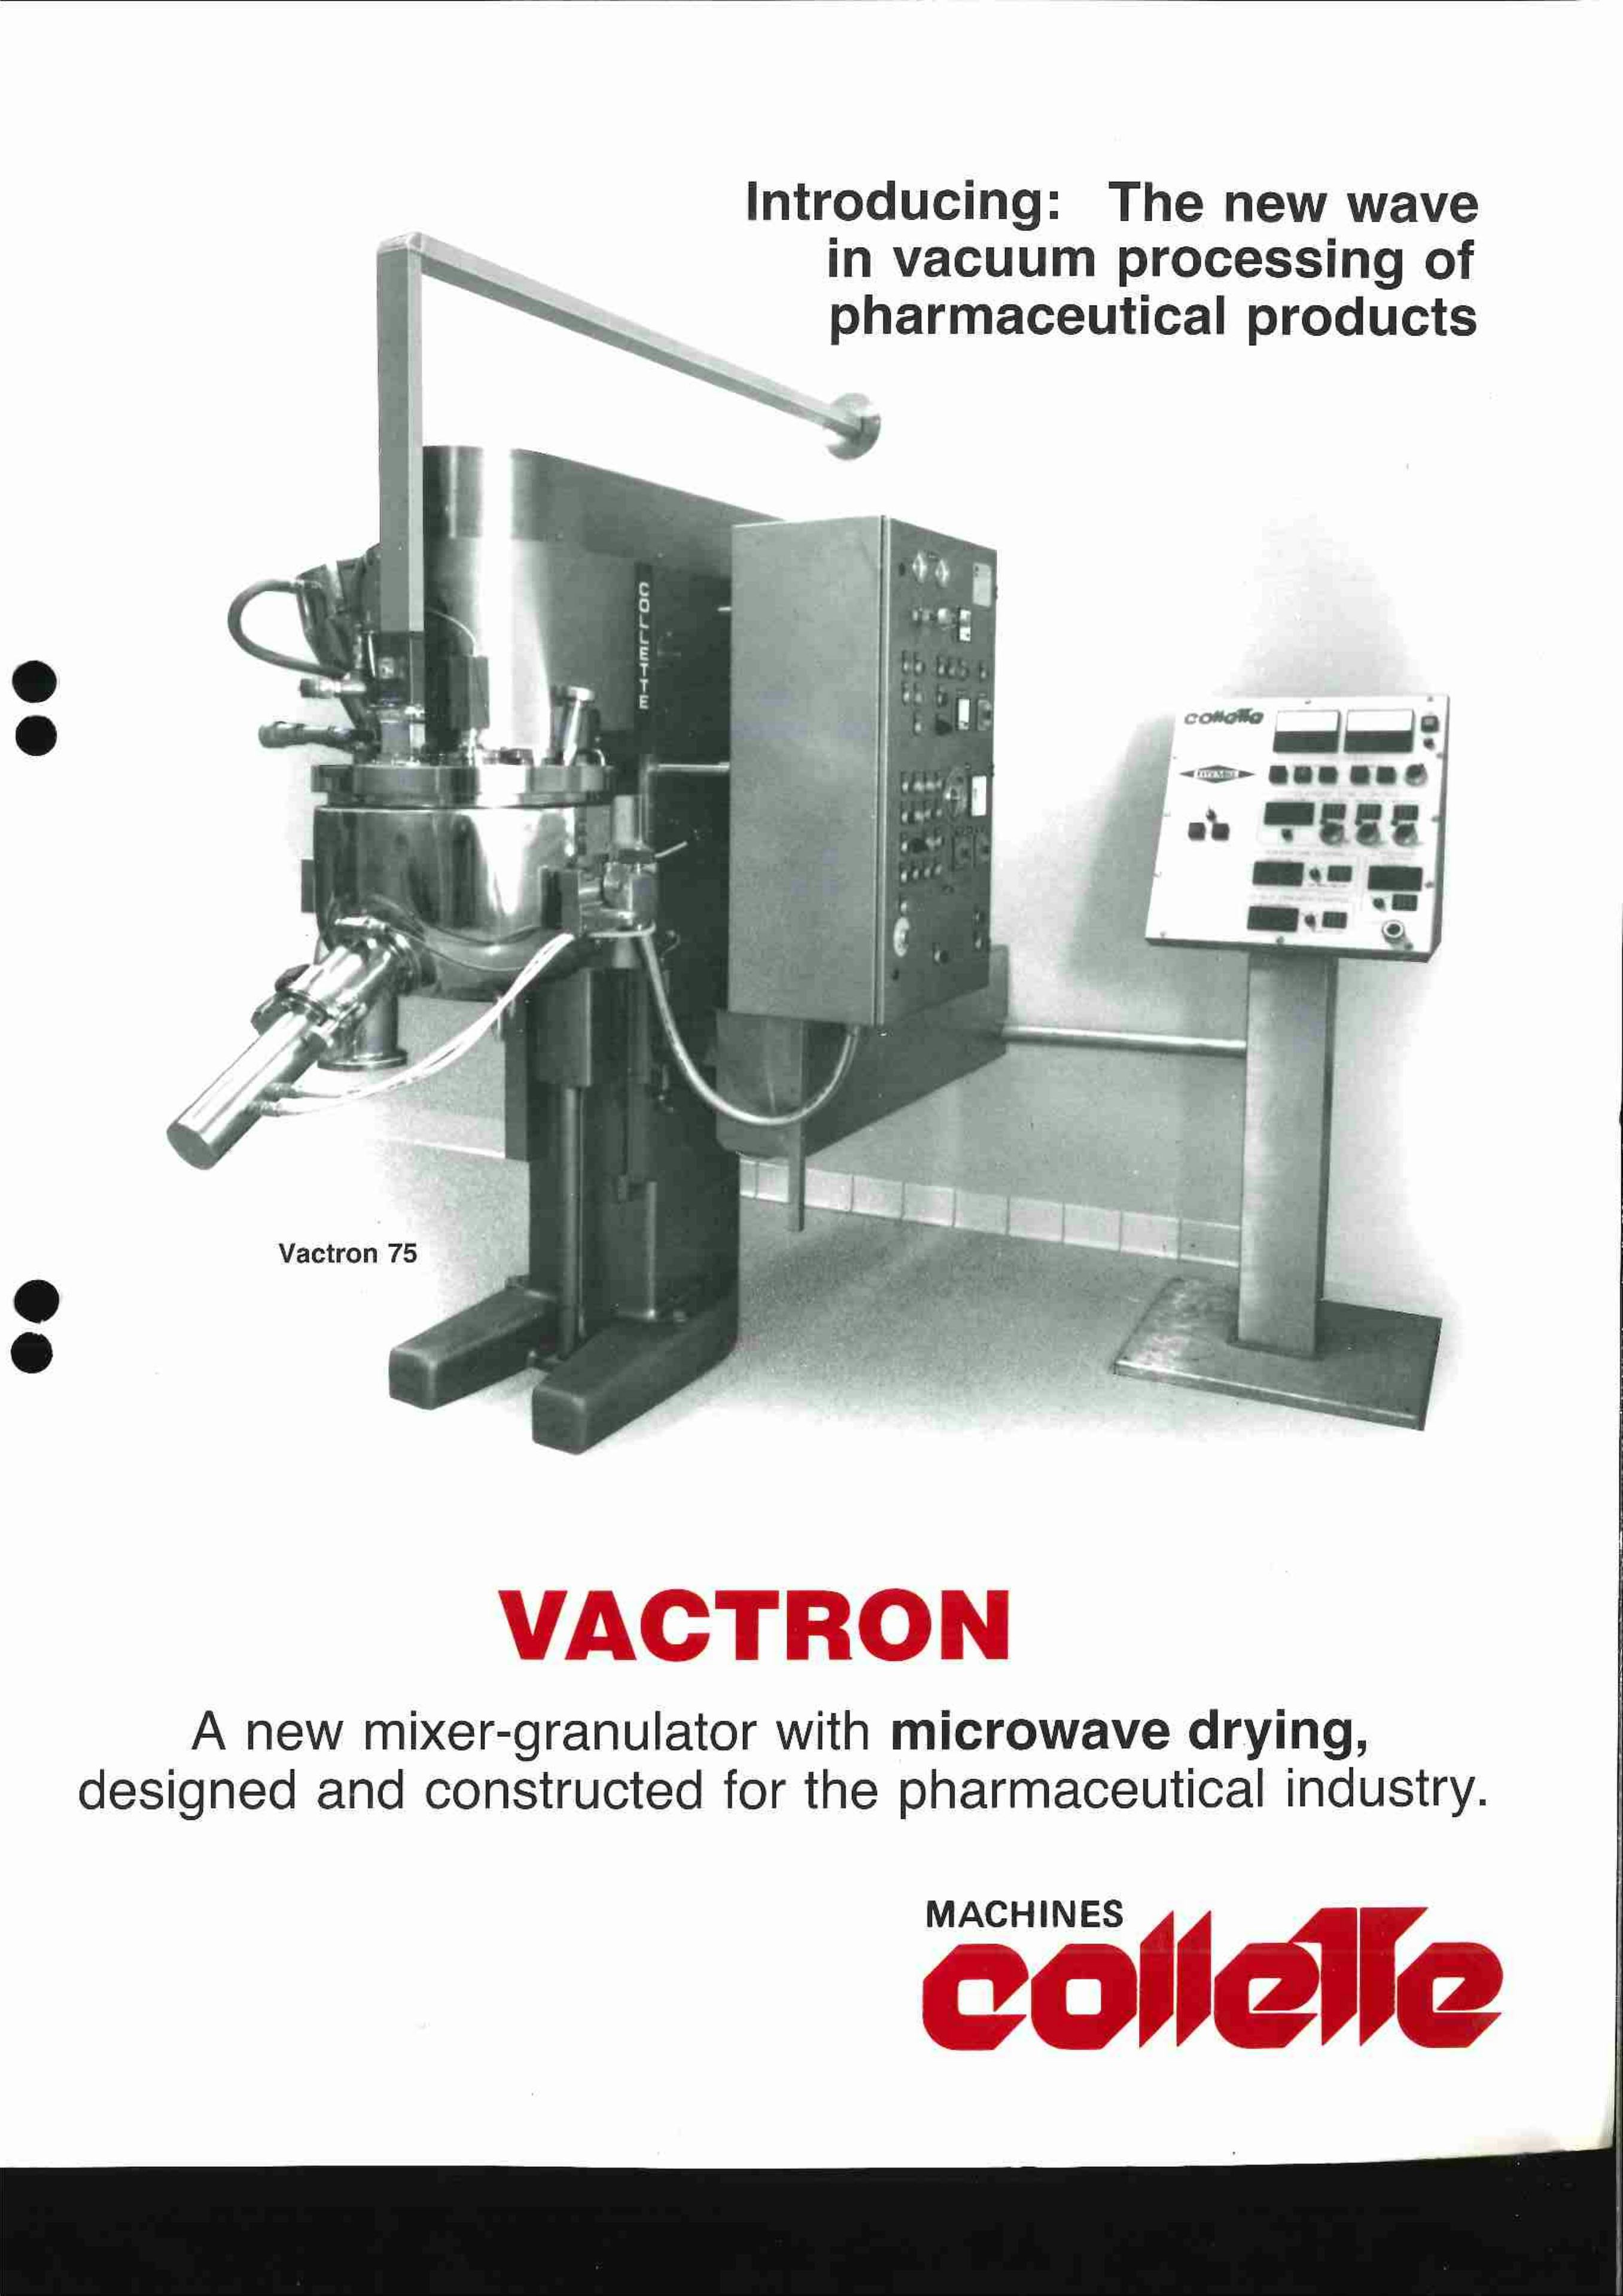 Collette GRAL 75 Vactron Microwave Drying and Solvent Recovery - Mélangeur universel - image 22